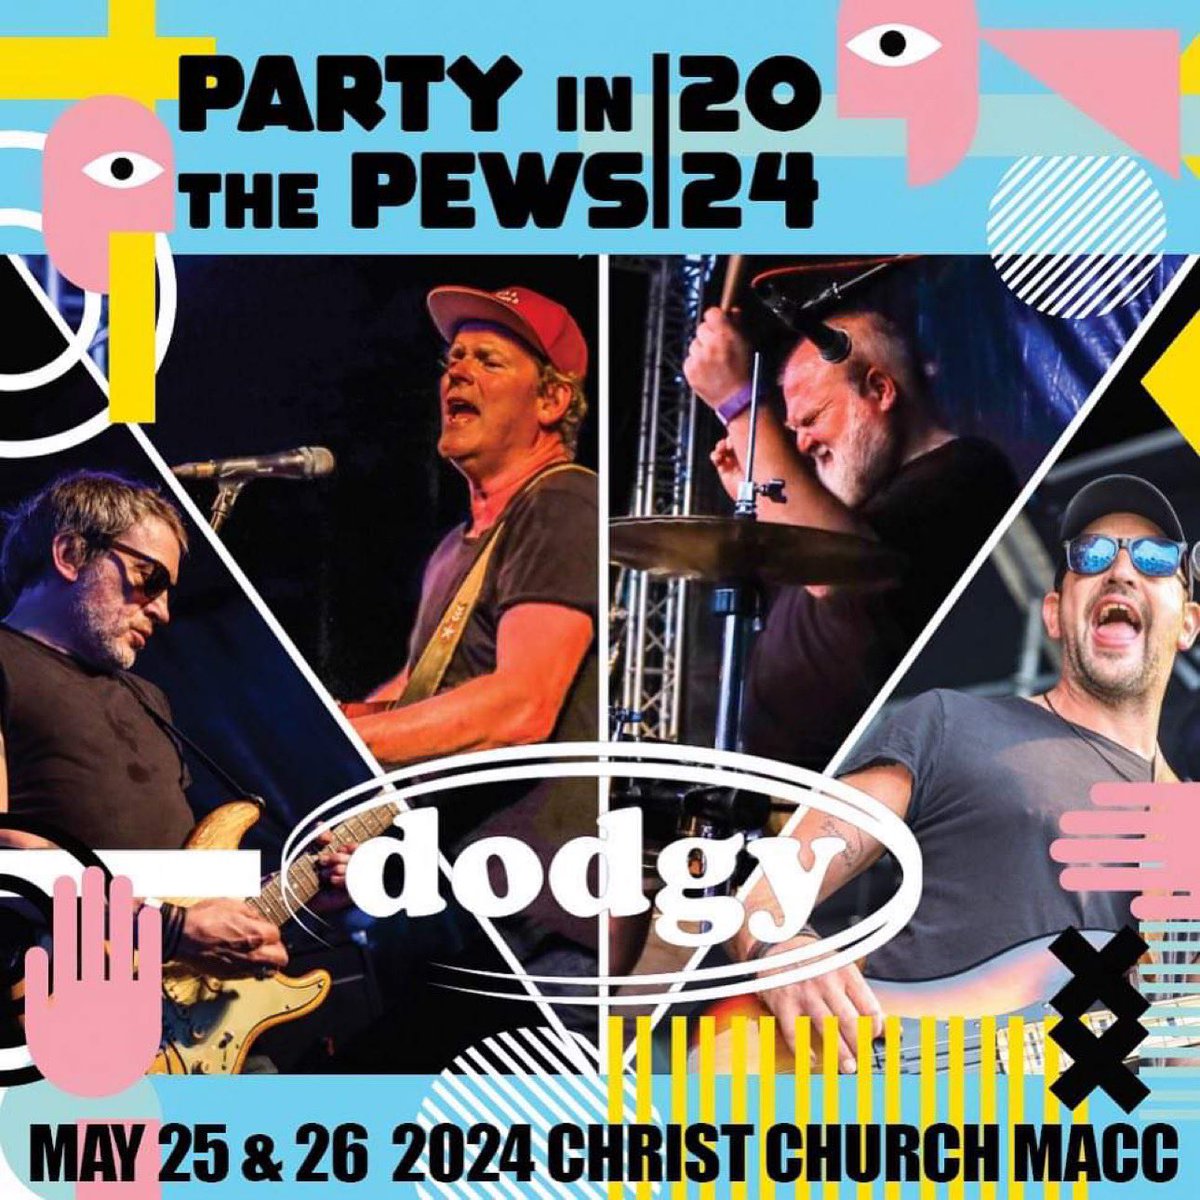 Roll on @partyinthepews!